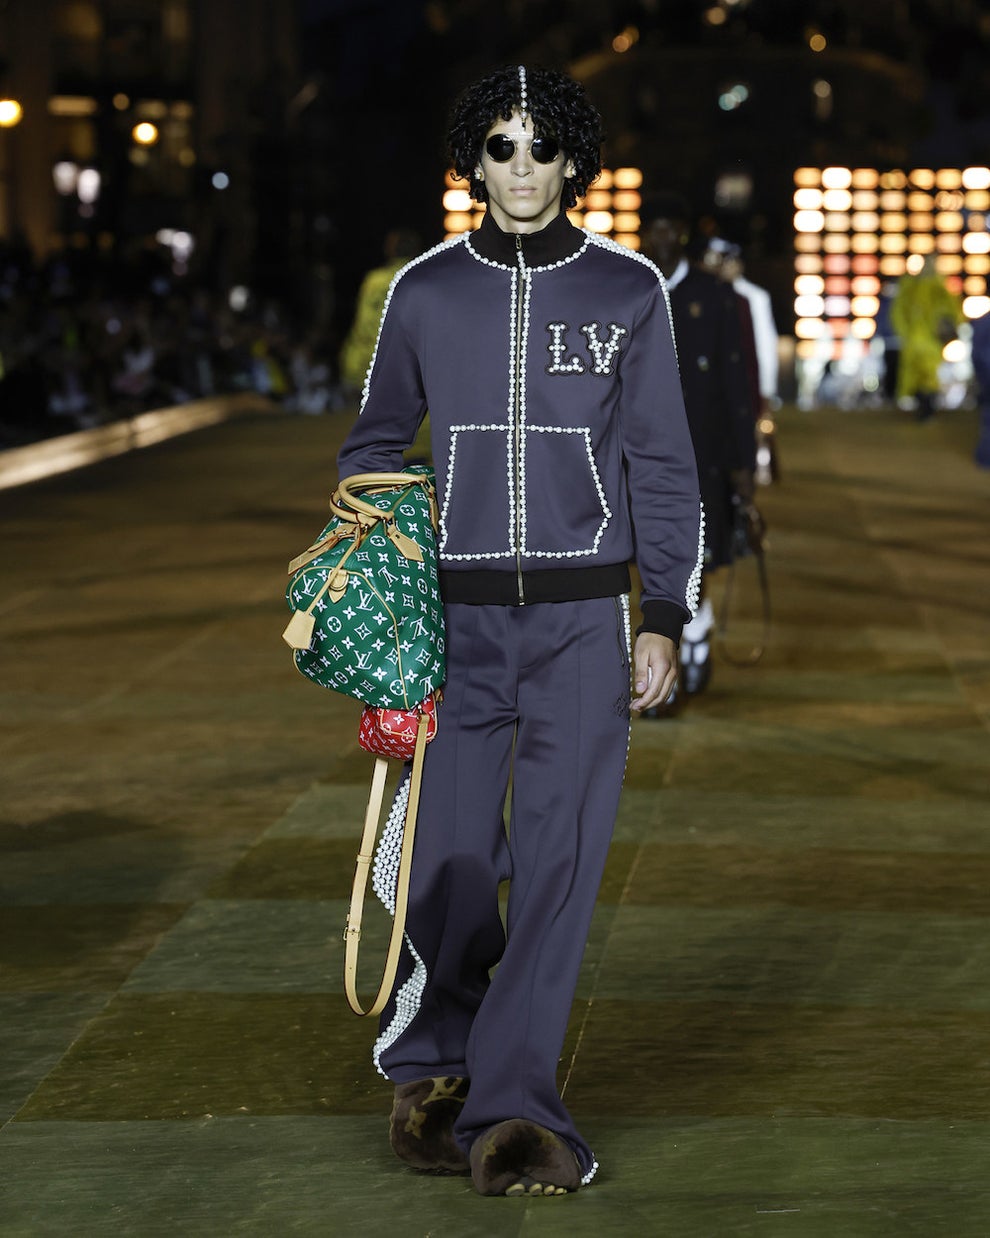 The Louis Vuitton Pharrell Williams Collection